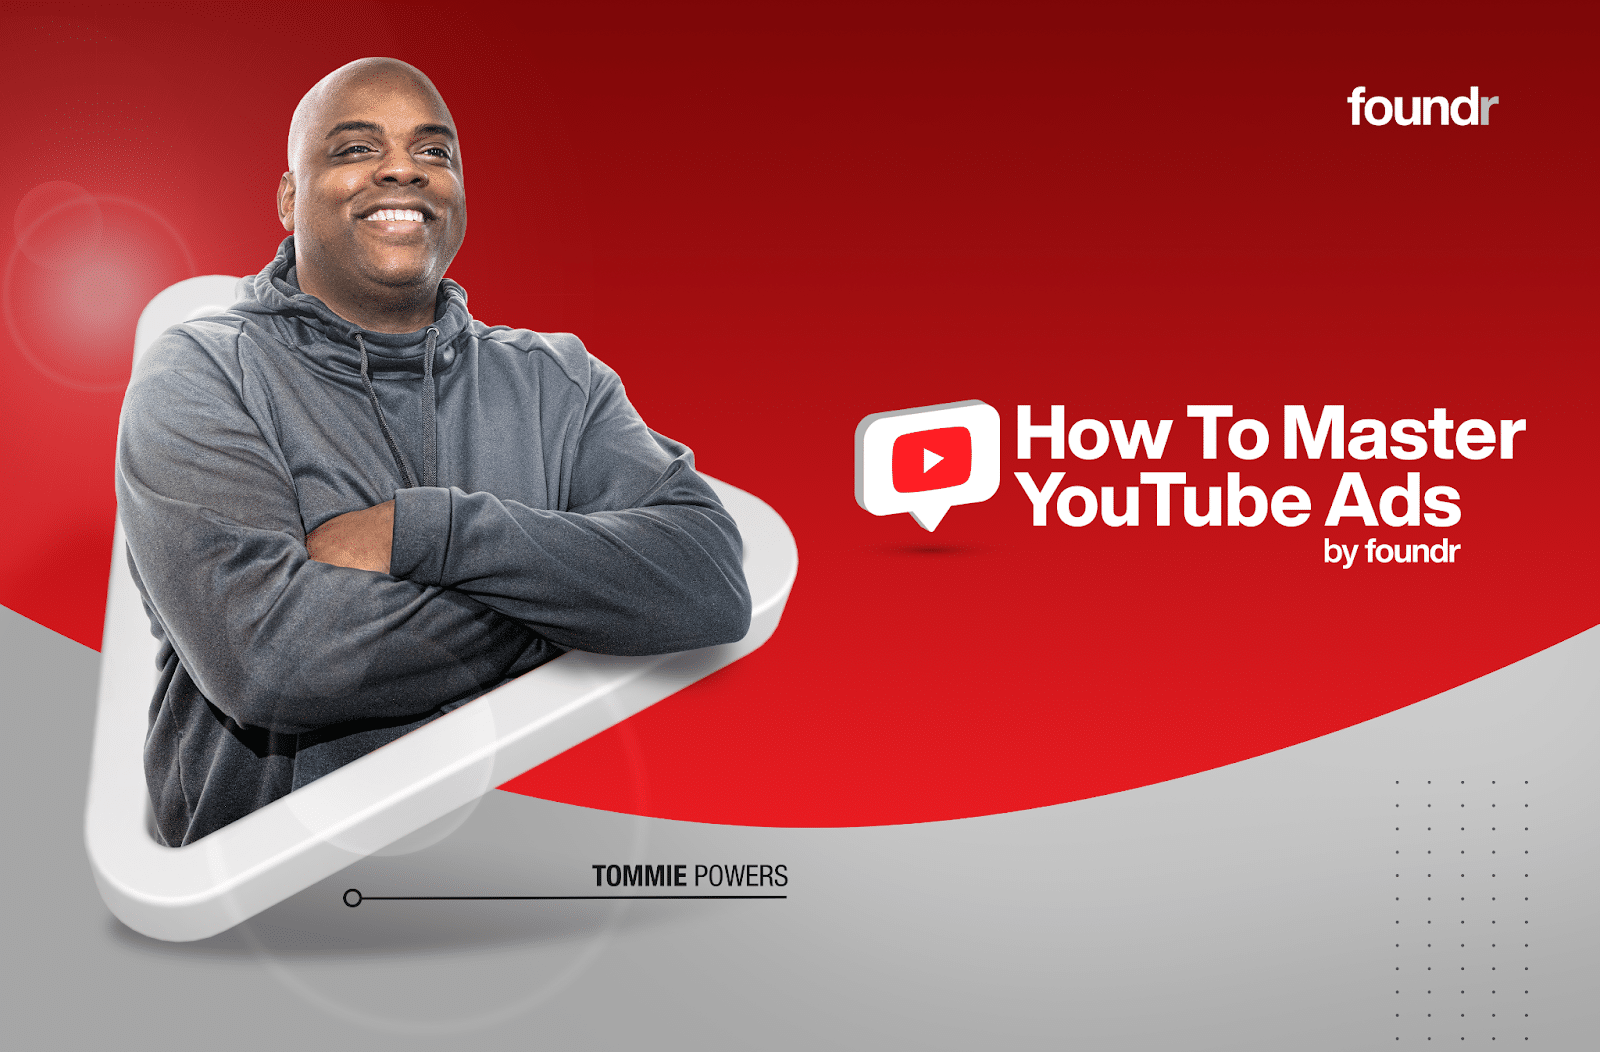 Tommie Powers - How To Master YouTube Ads